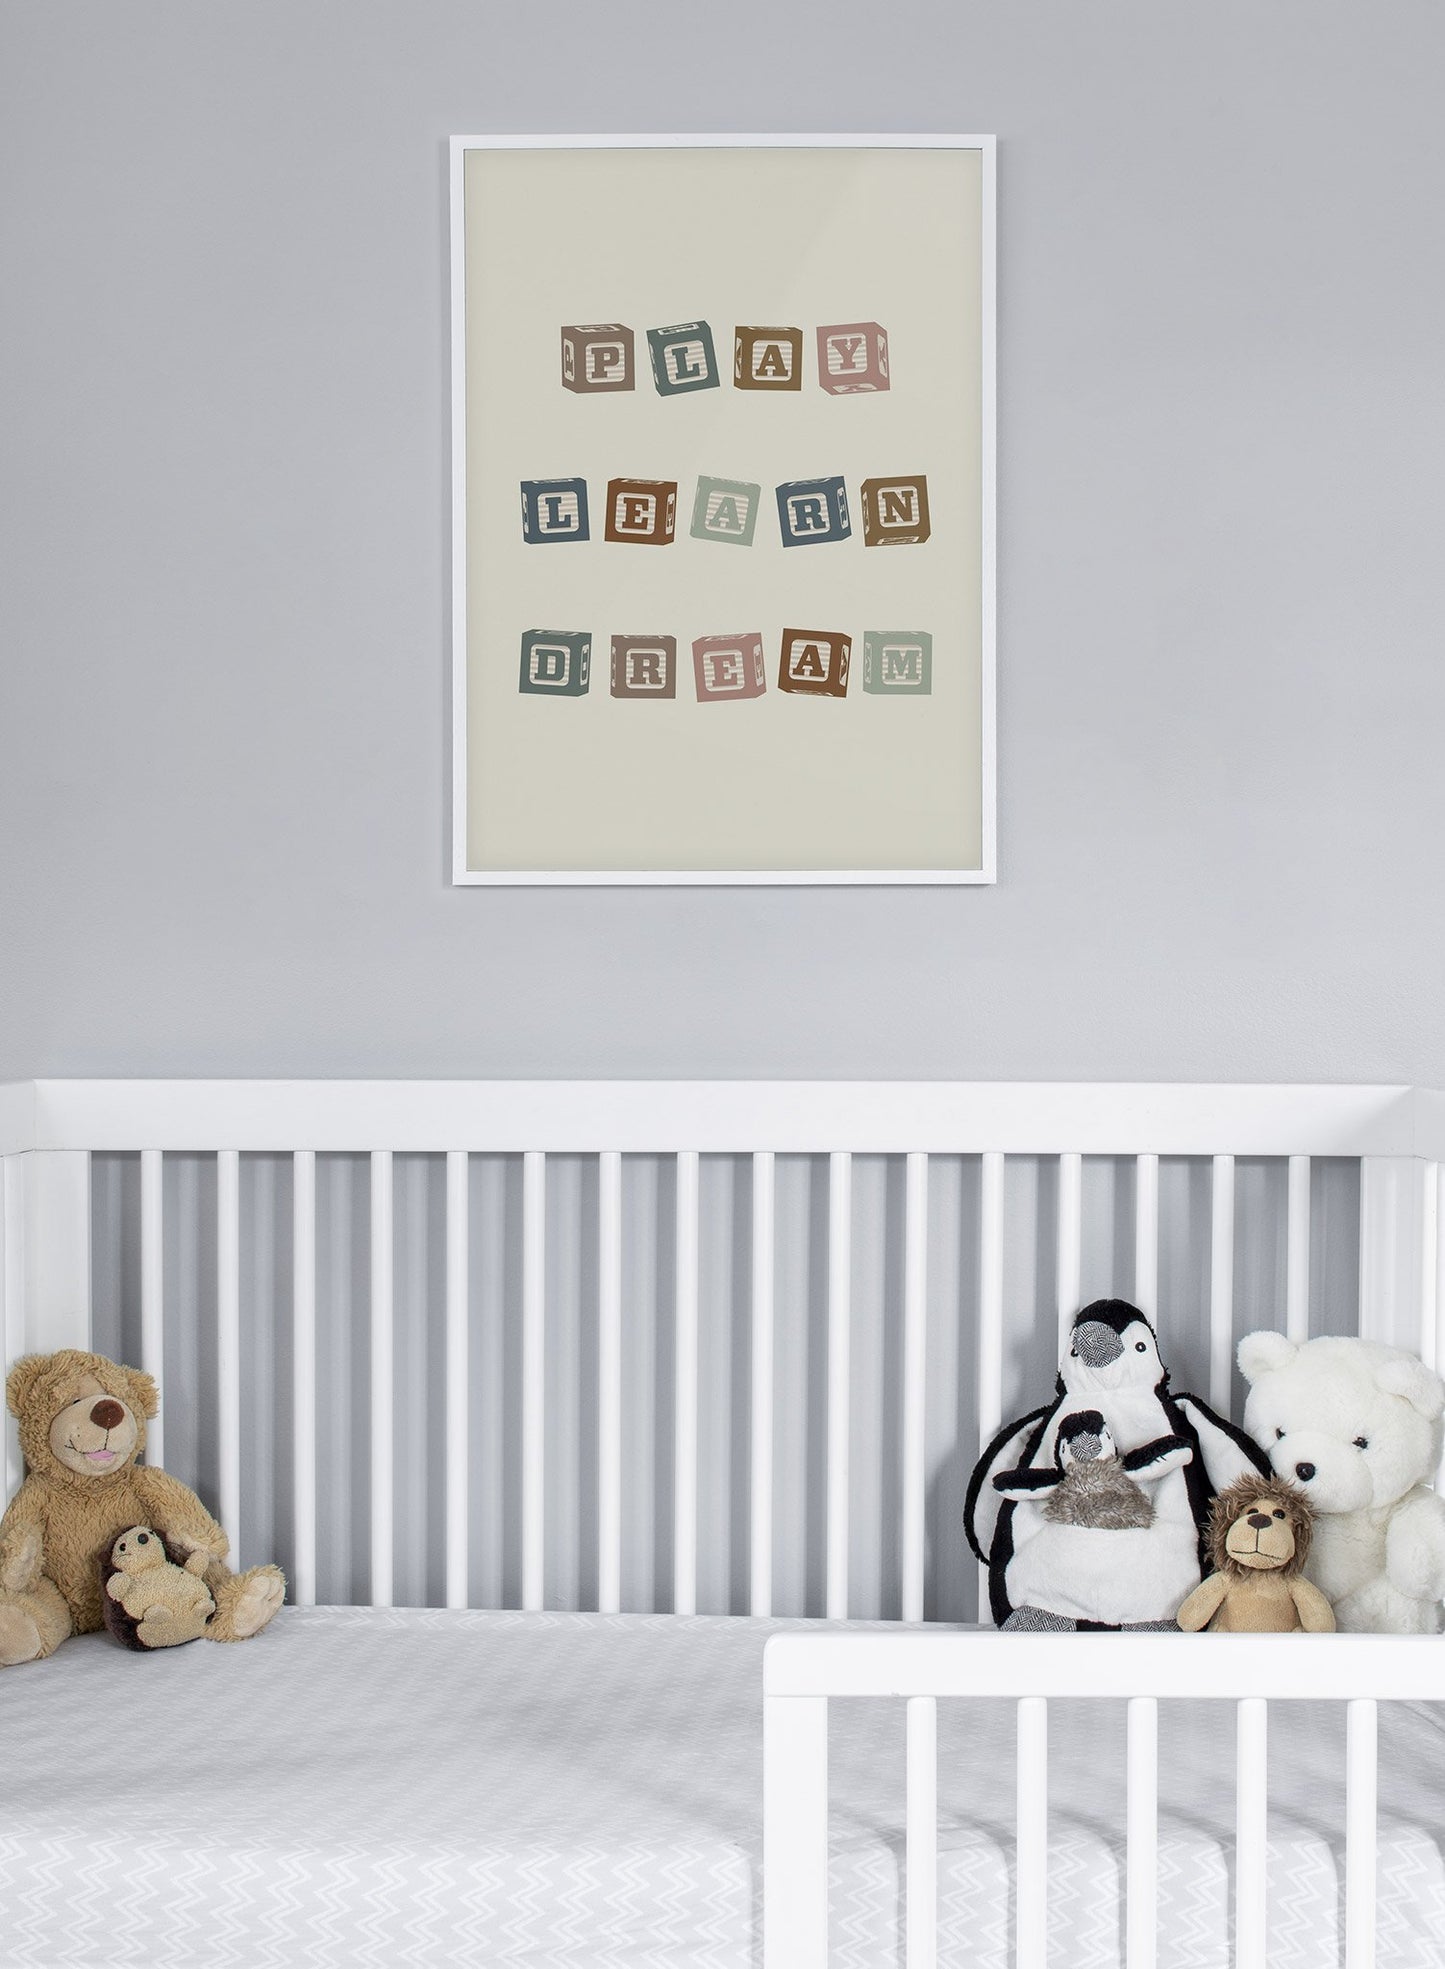 Kids nursery typography poster by Opposite Wall with Play Learn Dream - Lifestyle - Kids Nursery